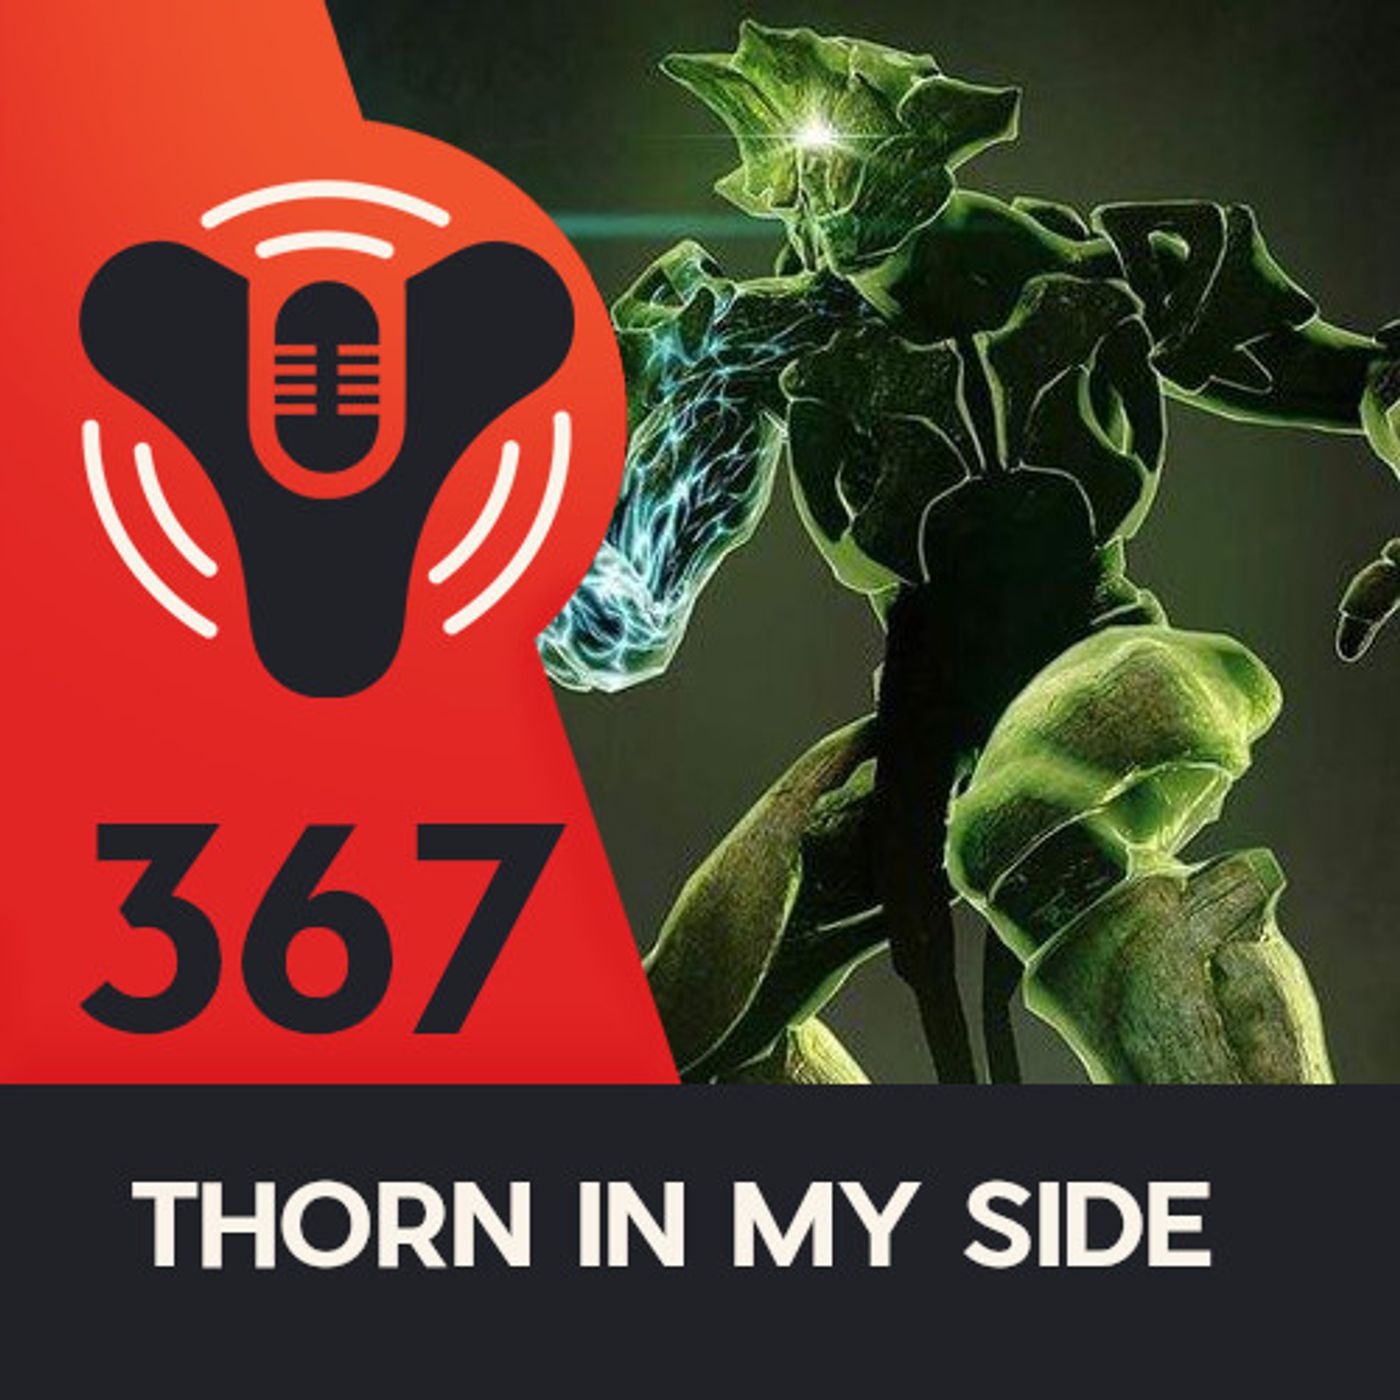 DCP + SideQuest Ep. 367 - Thorn In My Side - Star Wars Talk